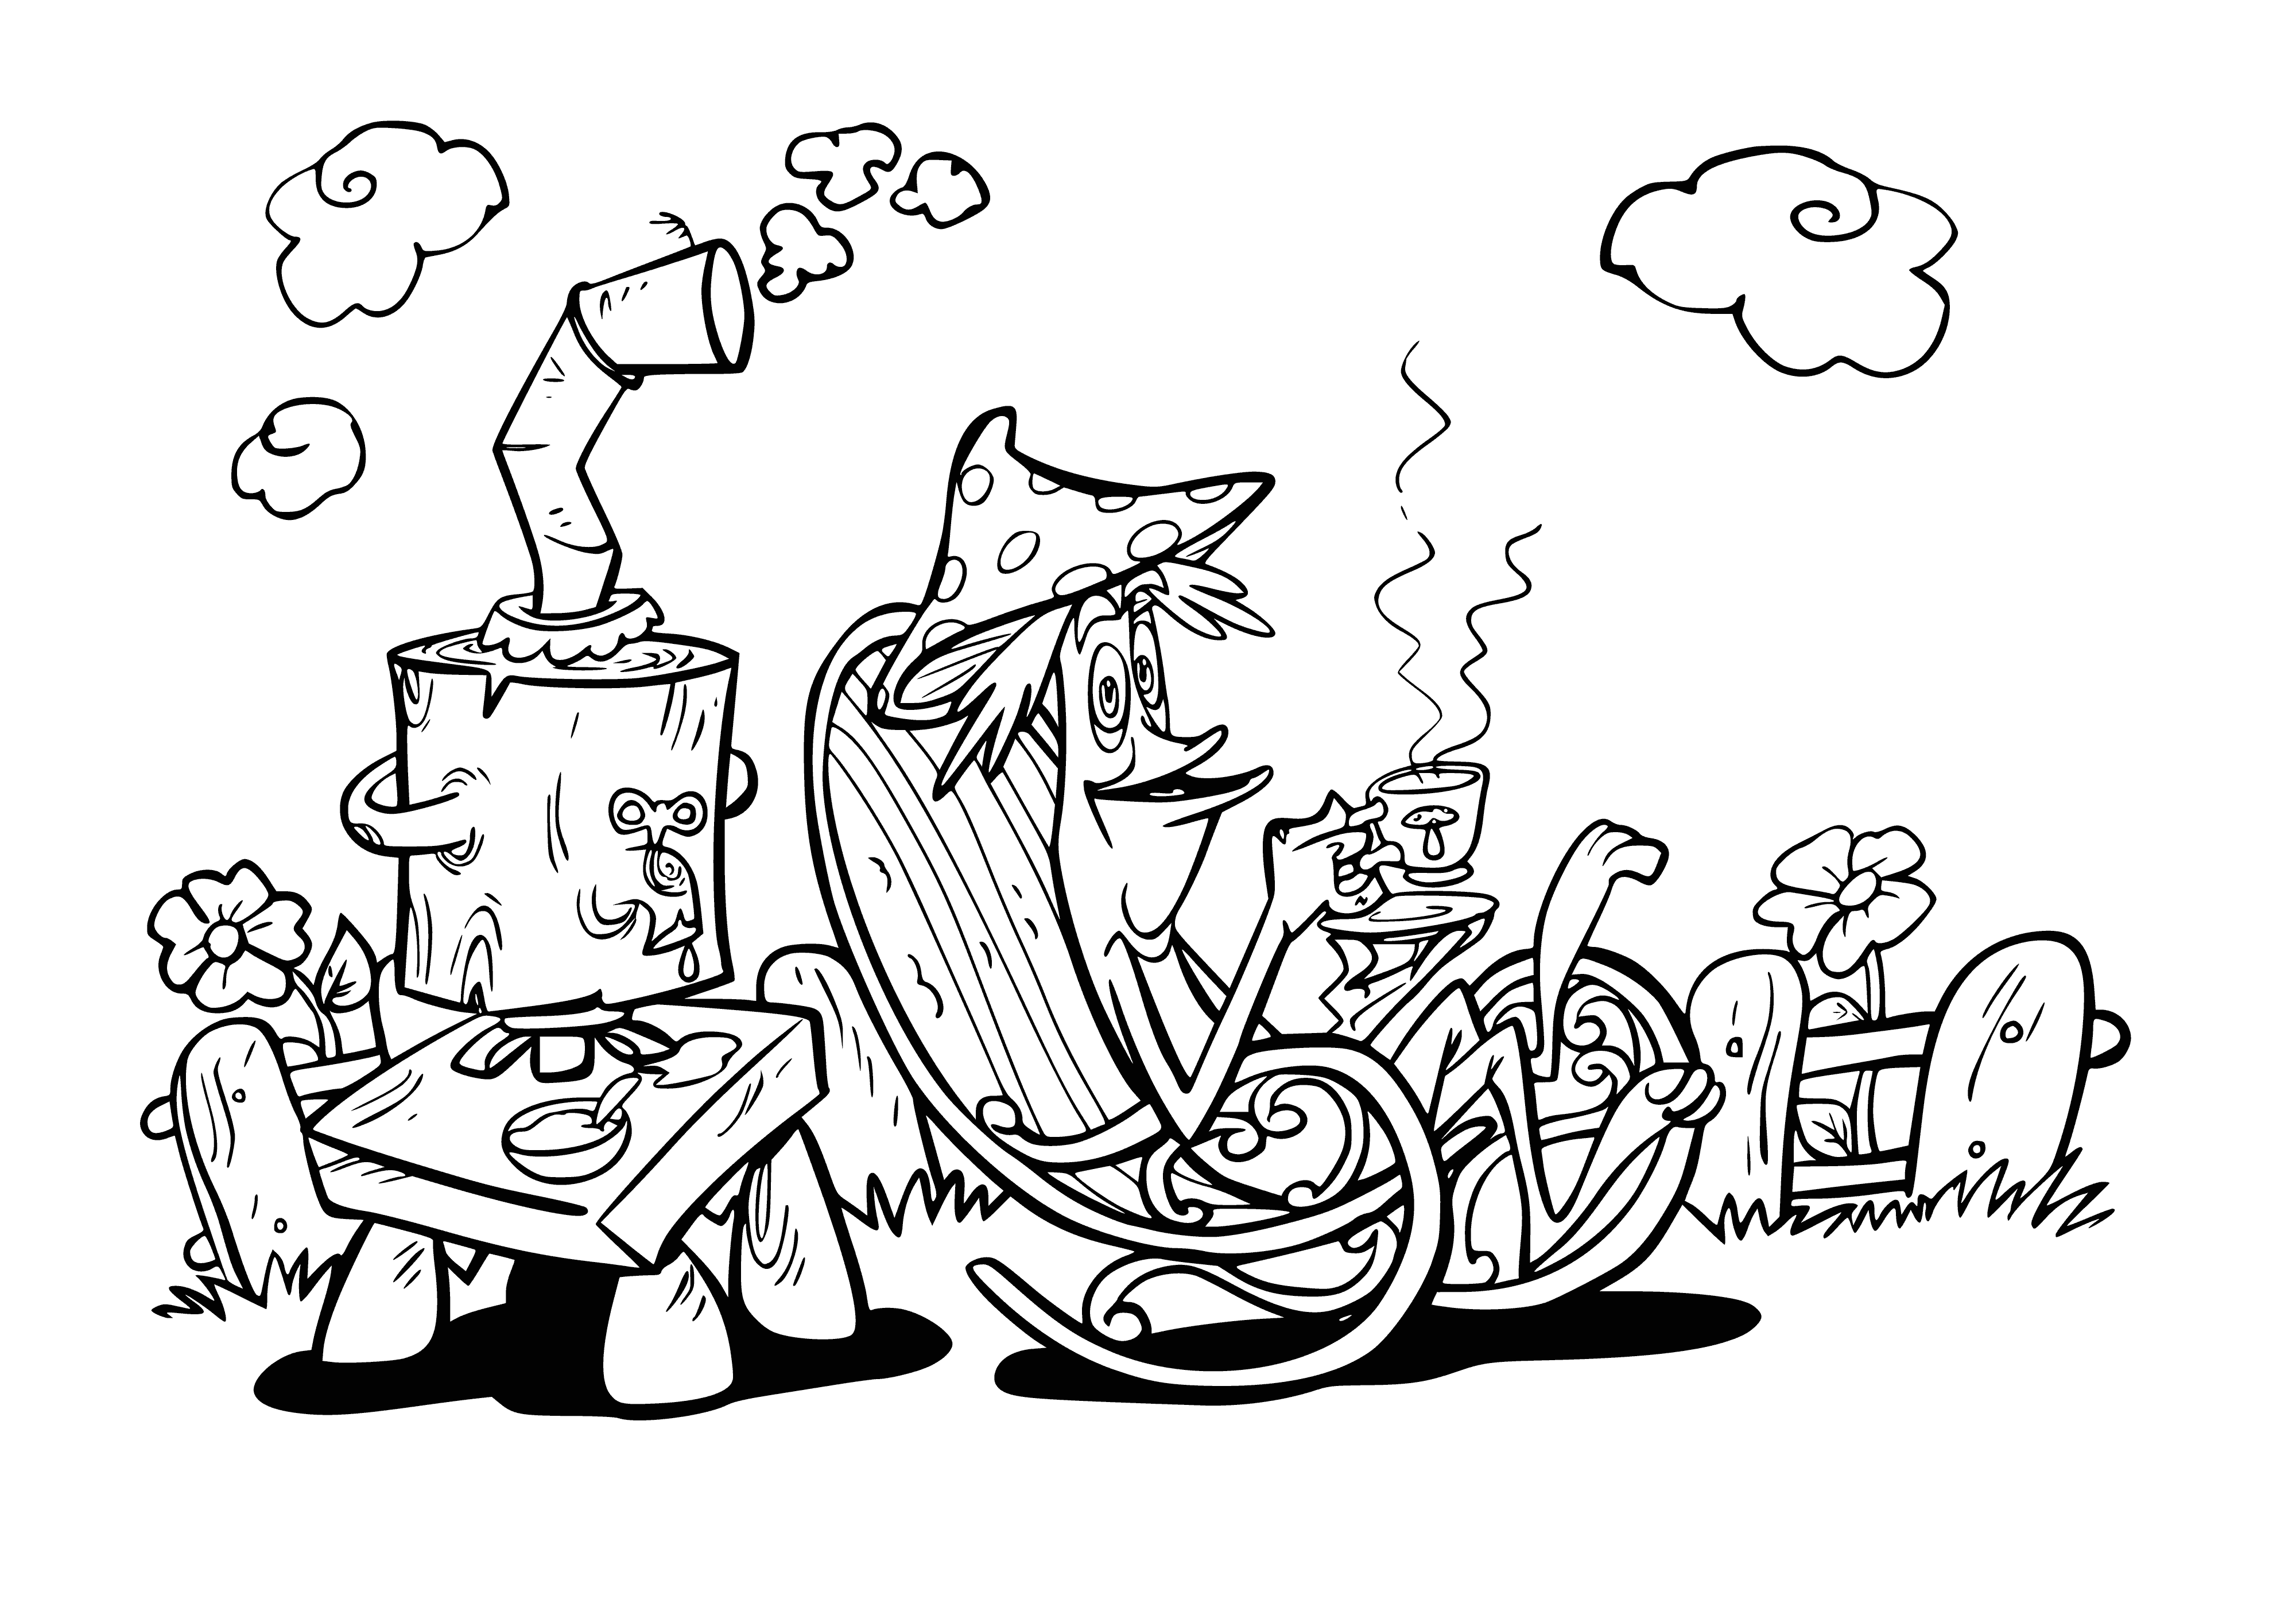 coloring page: Hmor sips tea, holding a book, from a cup at a table with a pot of tea in front.